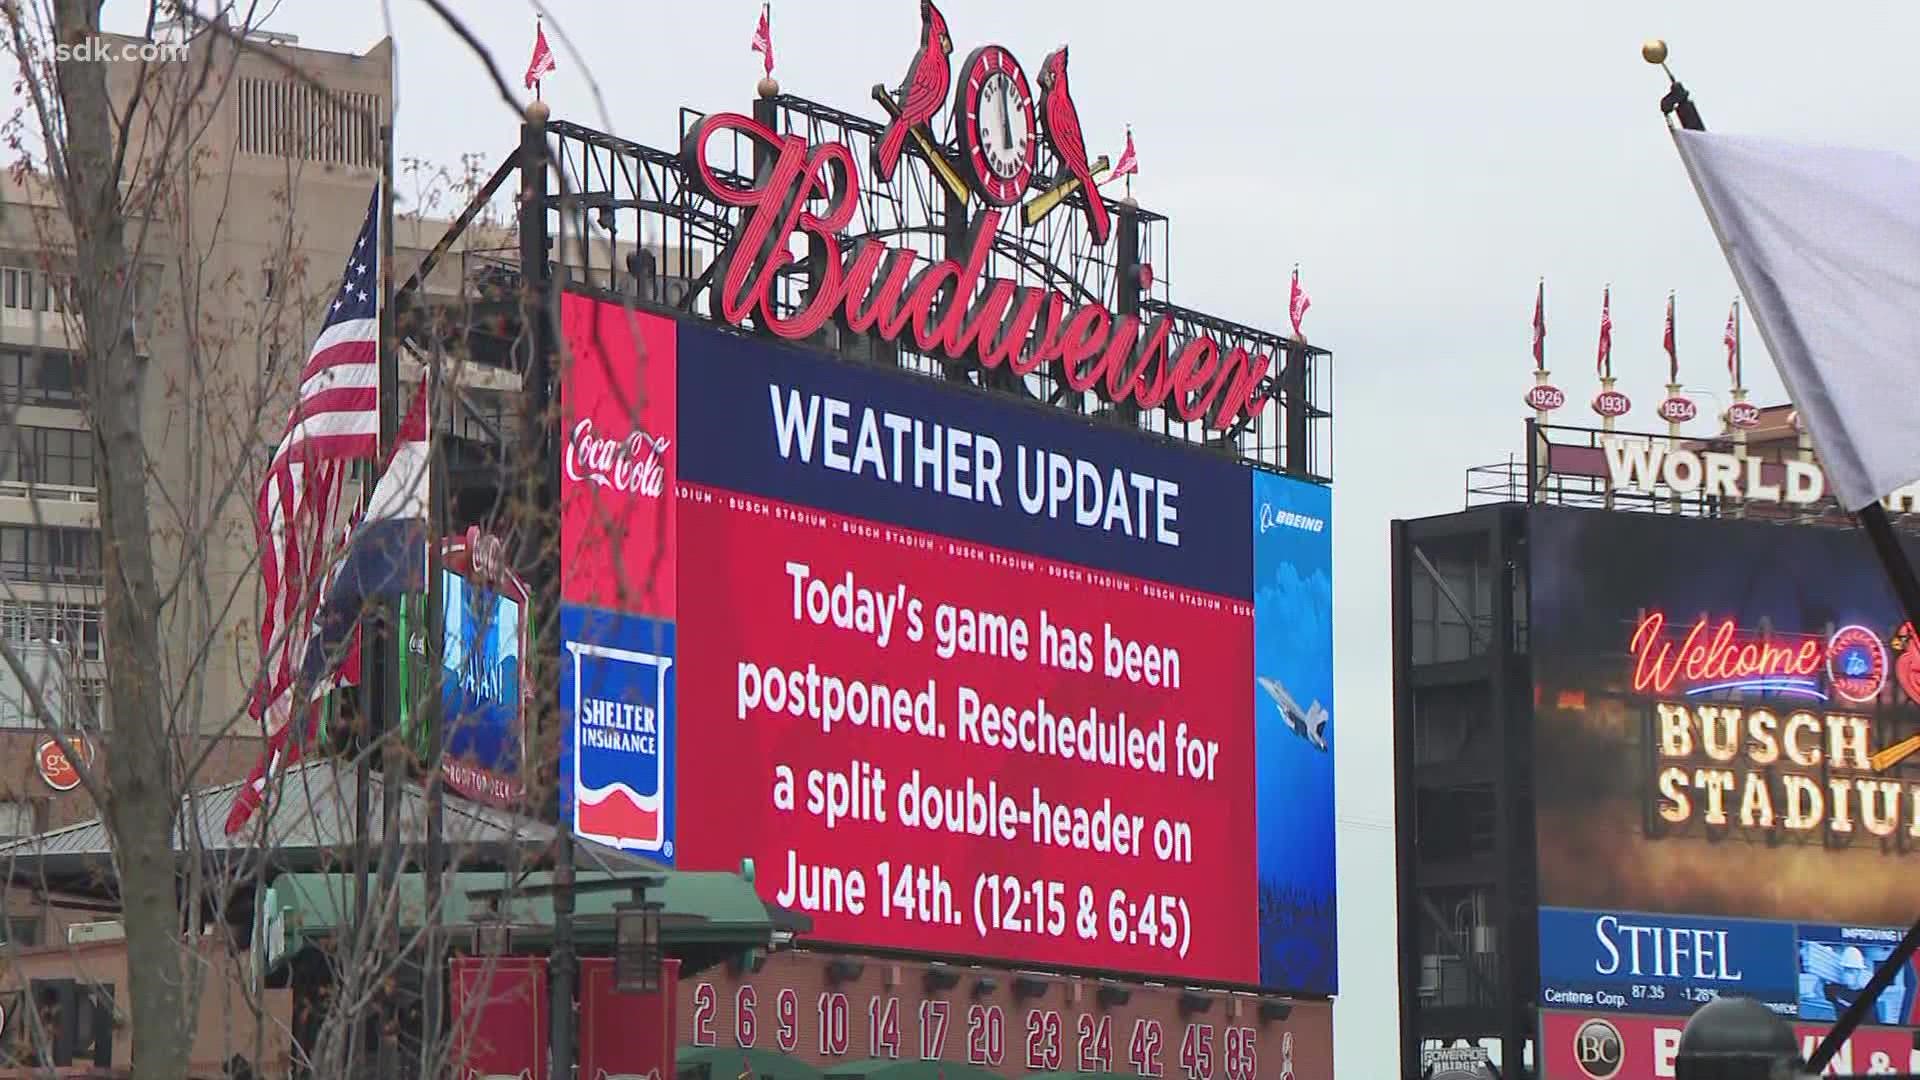 The Cardinals announced Monday’s game will be made up at 12:15 p.m. as part of a doubleheader on Tuesday, June 14.